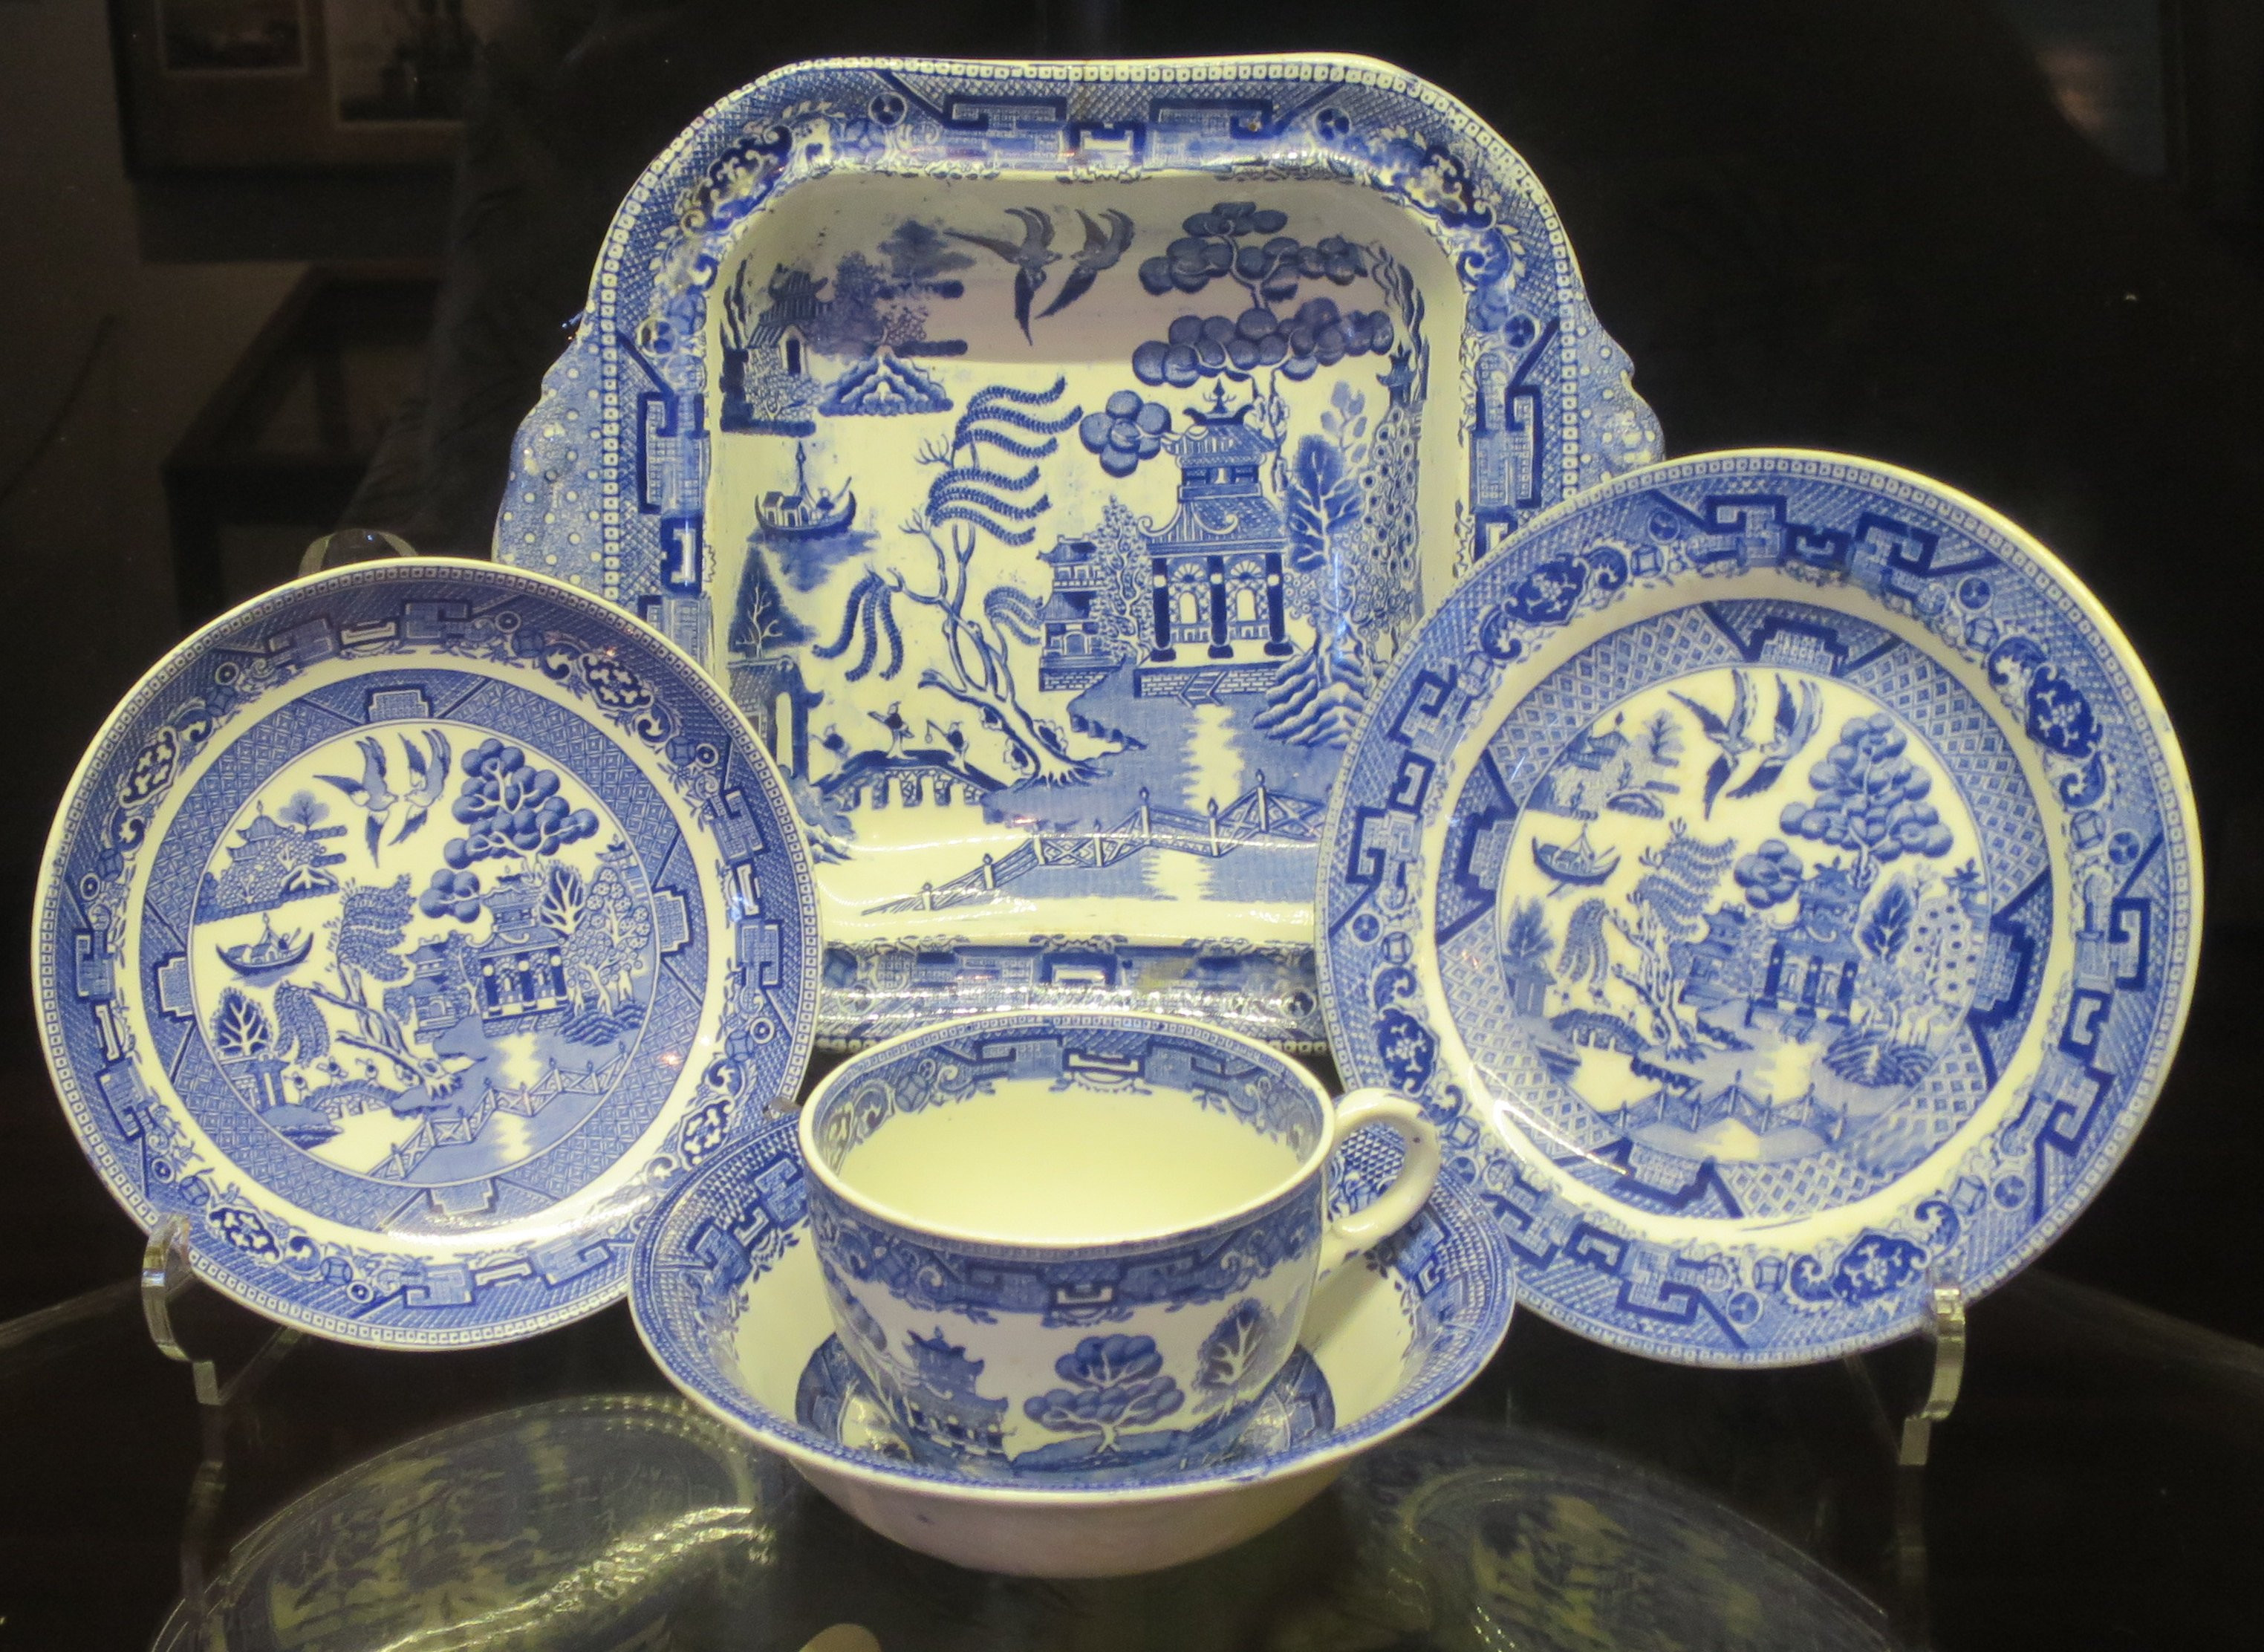 blue and white chinese vases antique of willow pattern wikipedia in different shapes in a willow pattern 19th century